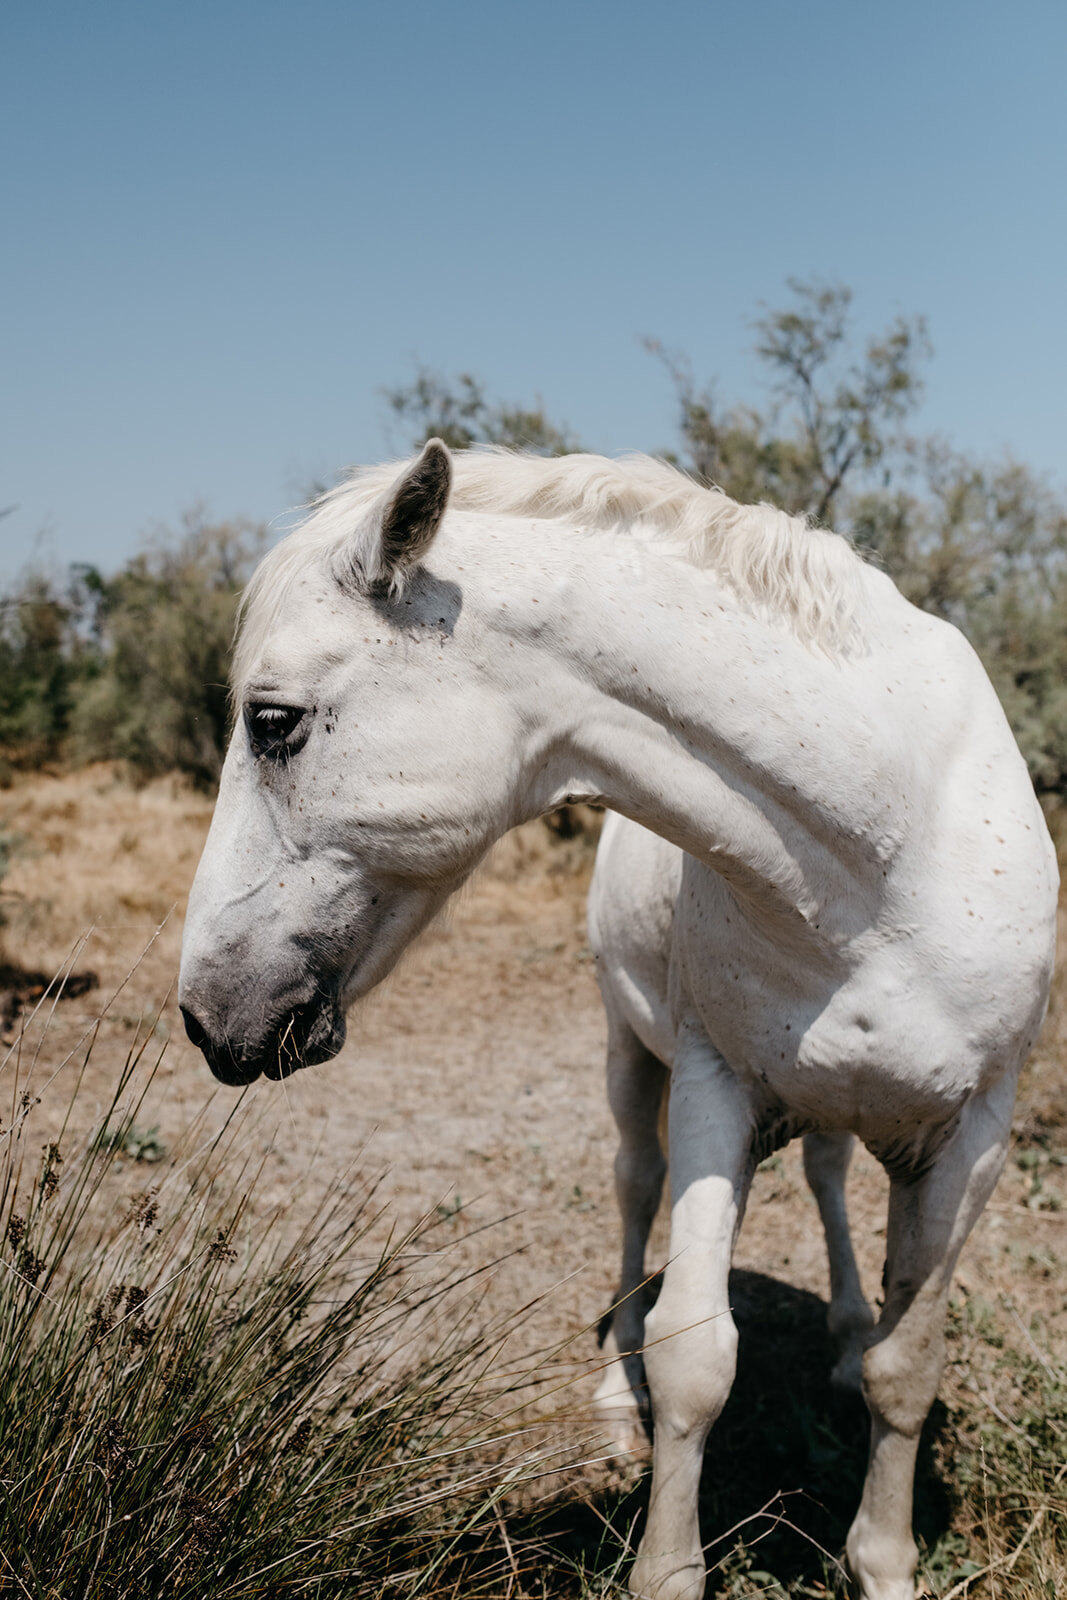 The beautiful white horses of the Camargue